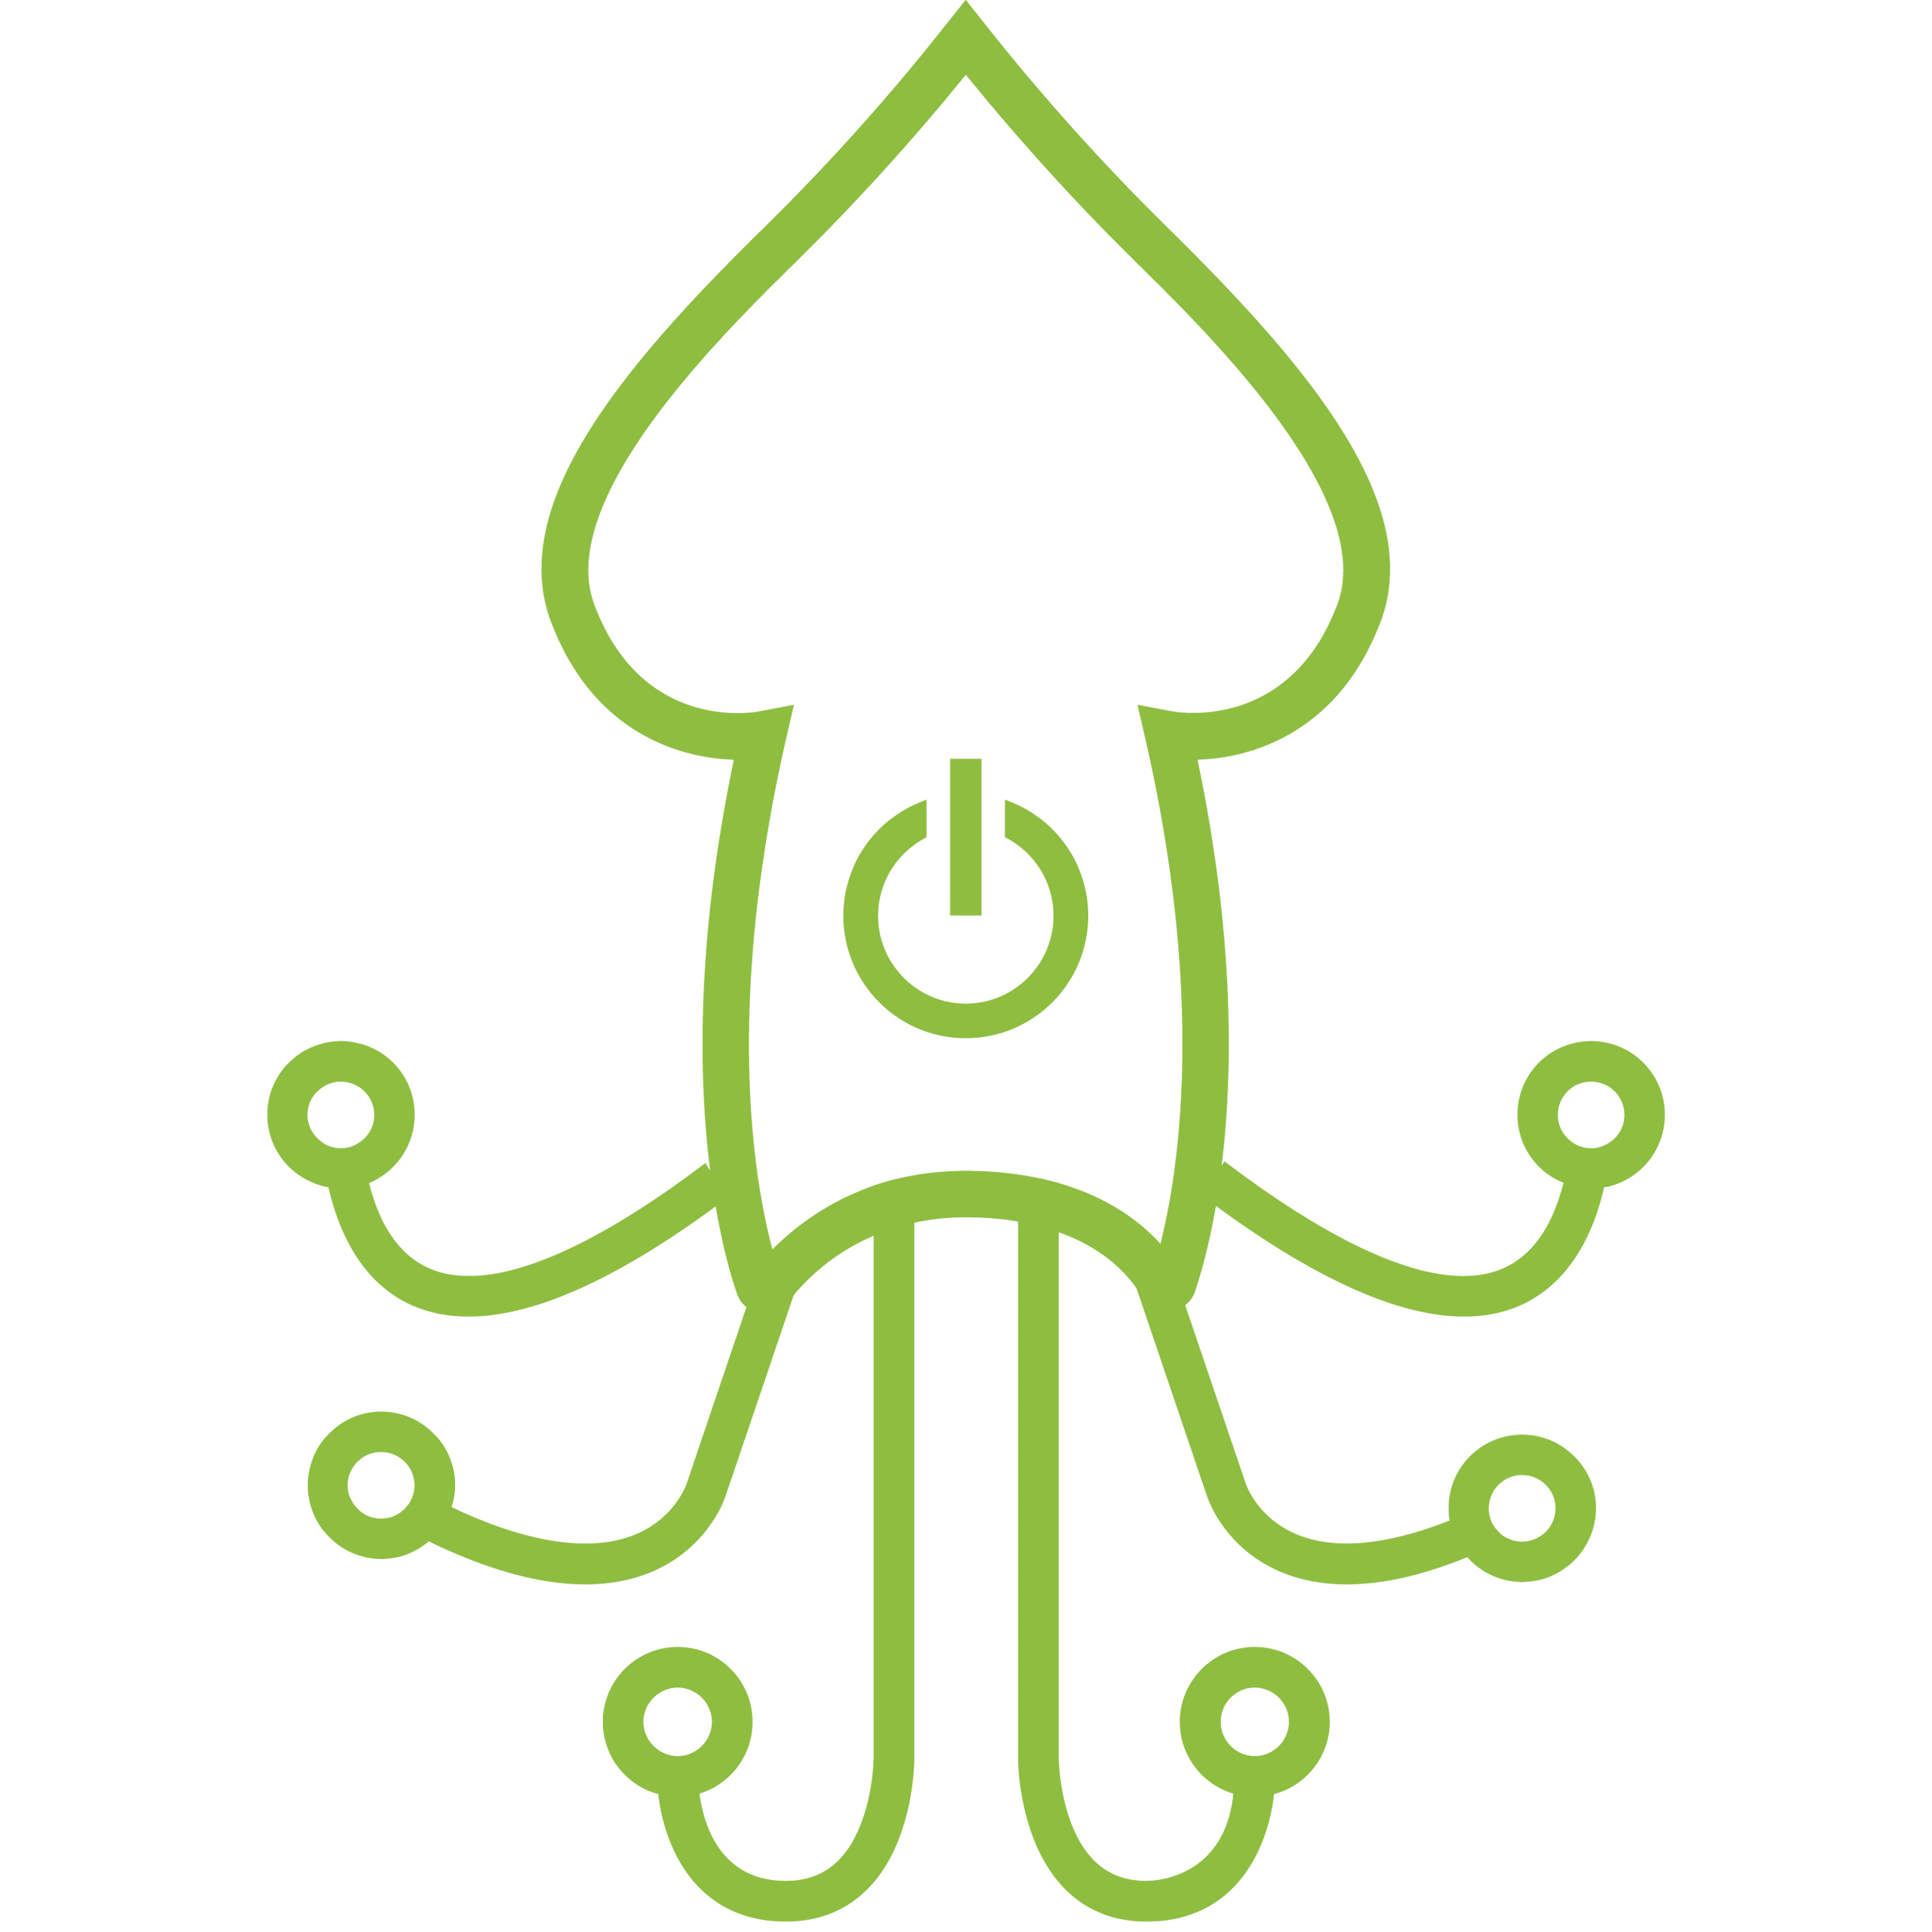 Stylized squid logo with 6 arms that mimic circuit board tracer wires.